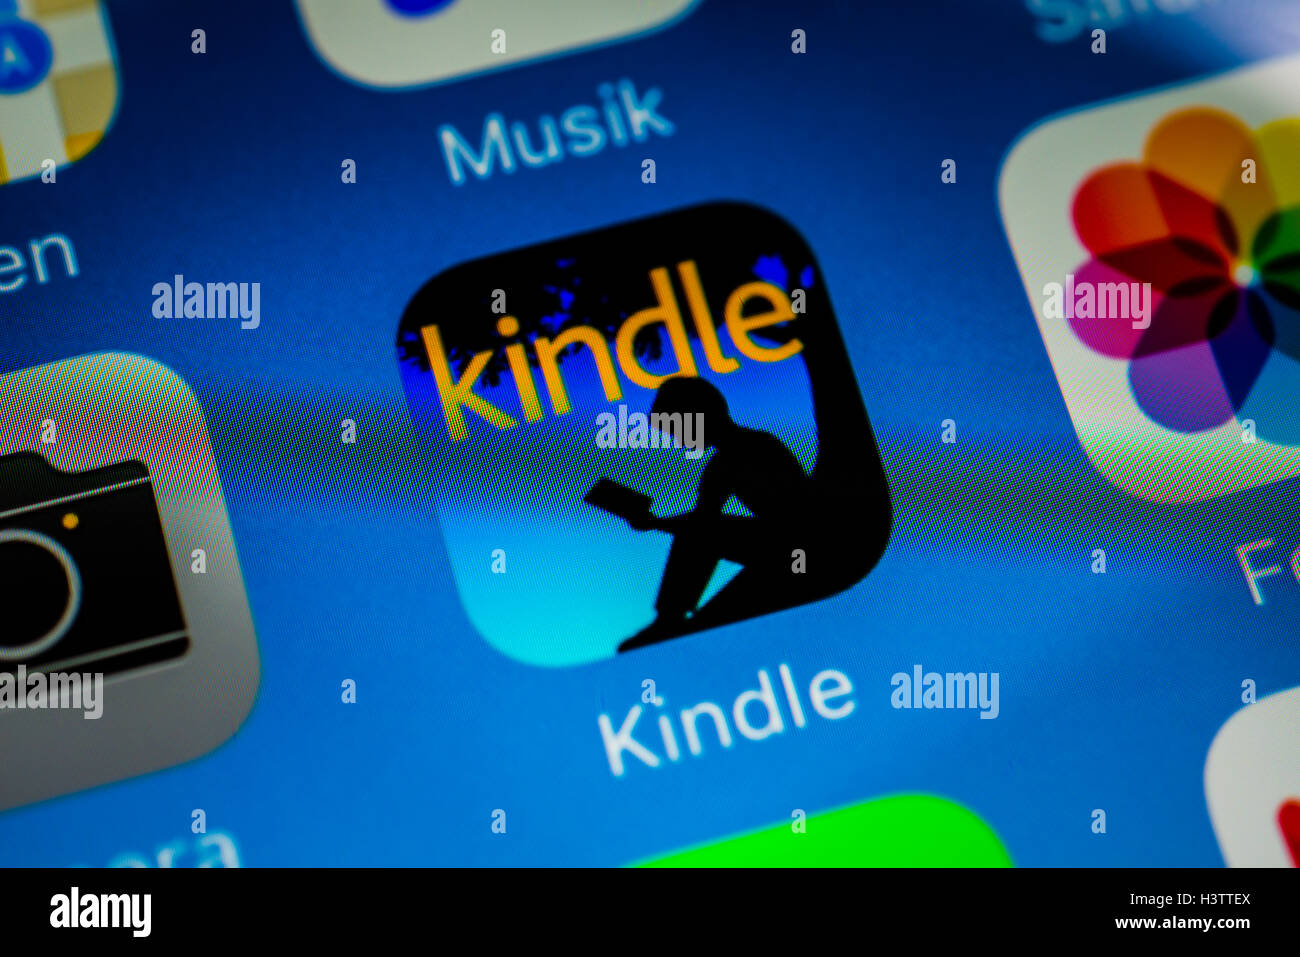 Smartphone screen displaying Kindle app in detail Stock Photo